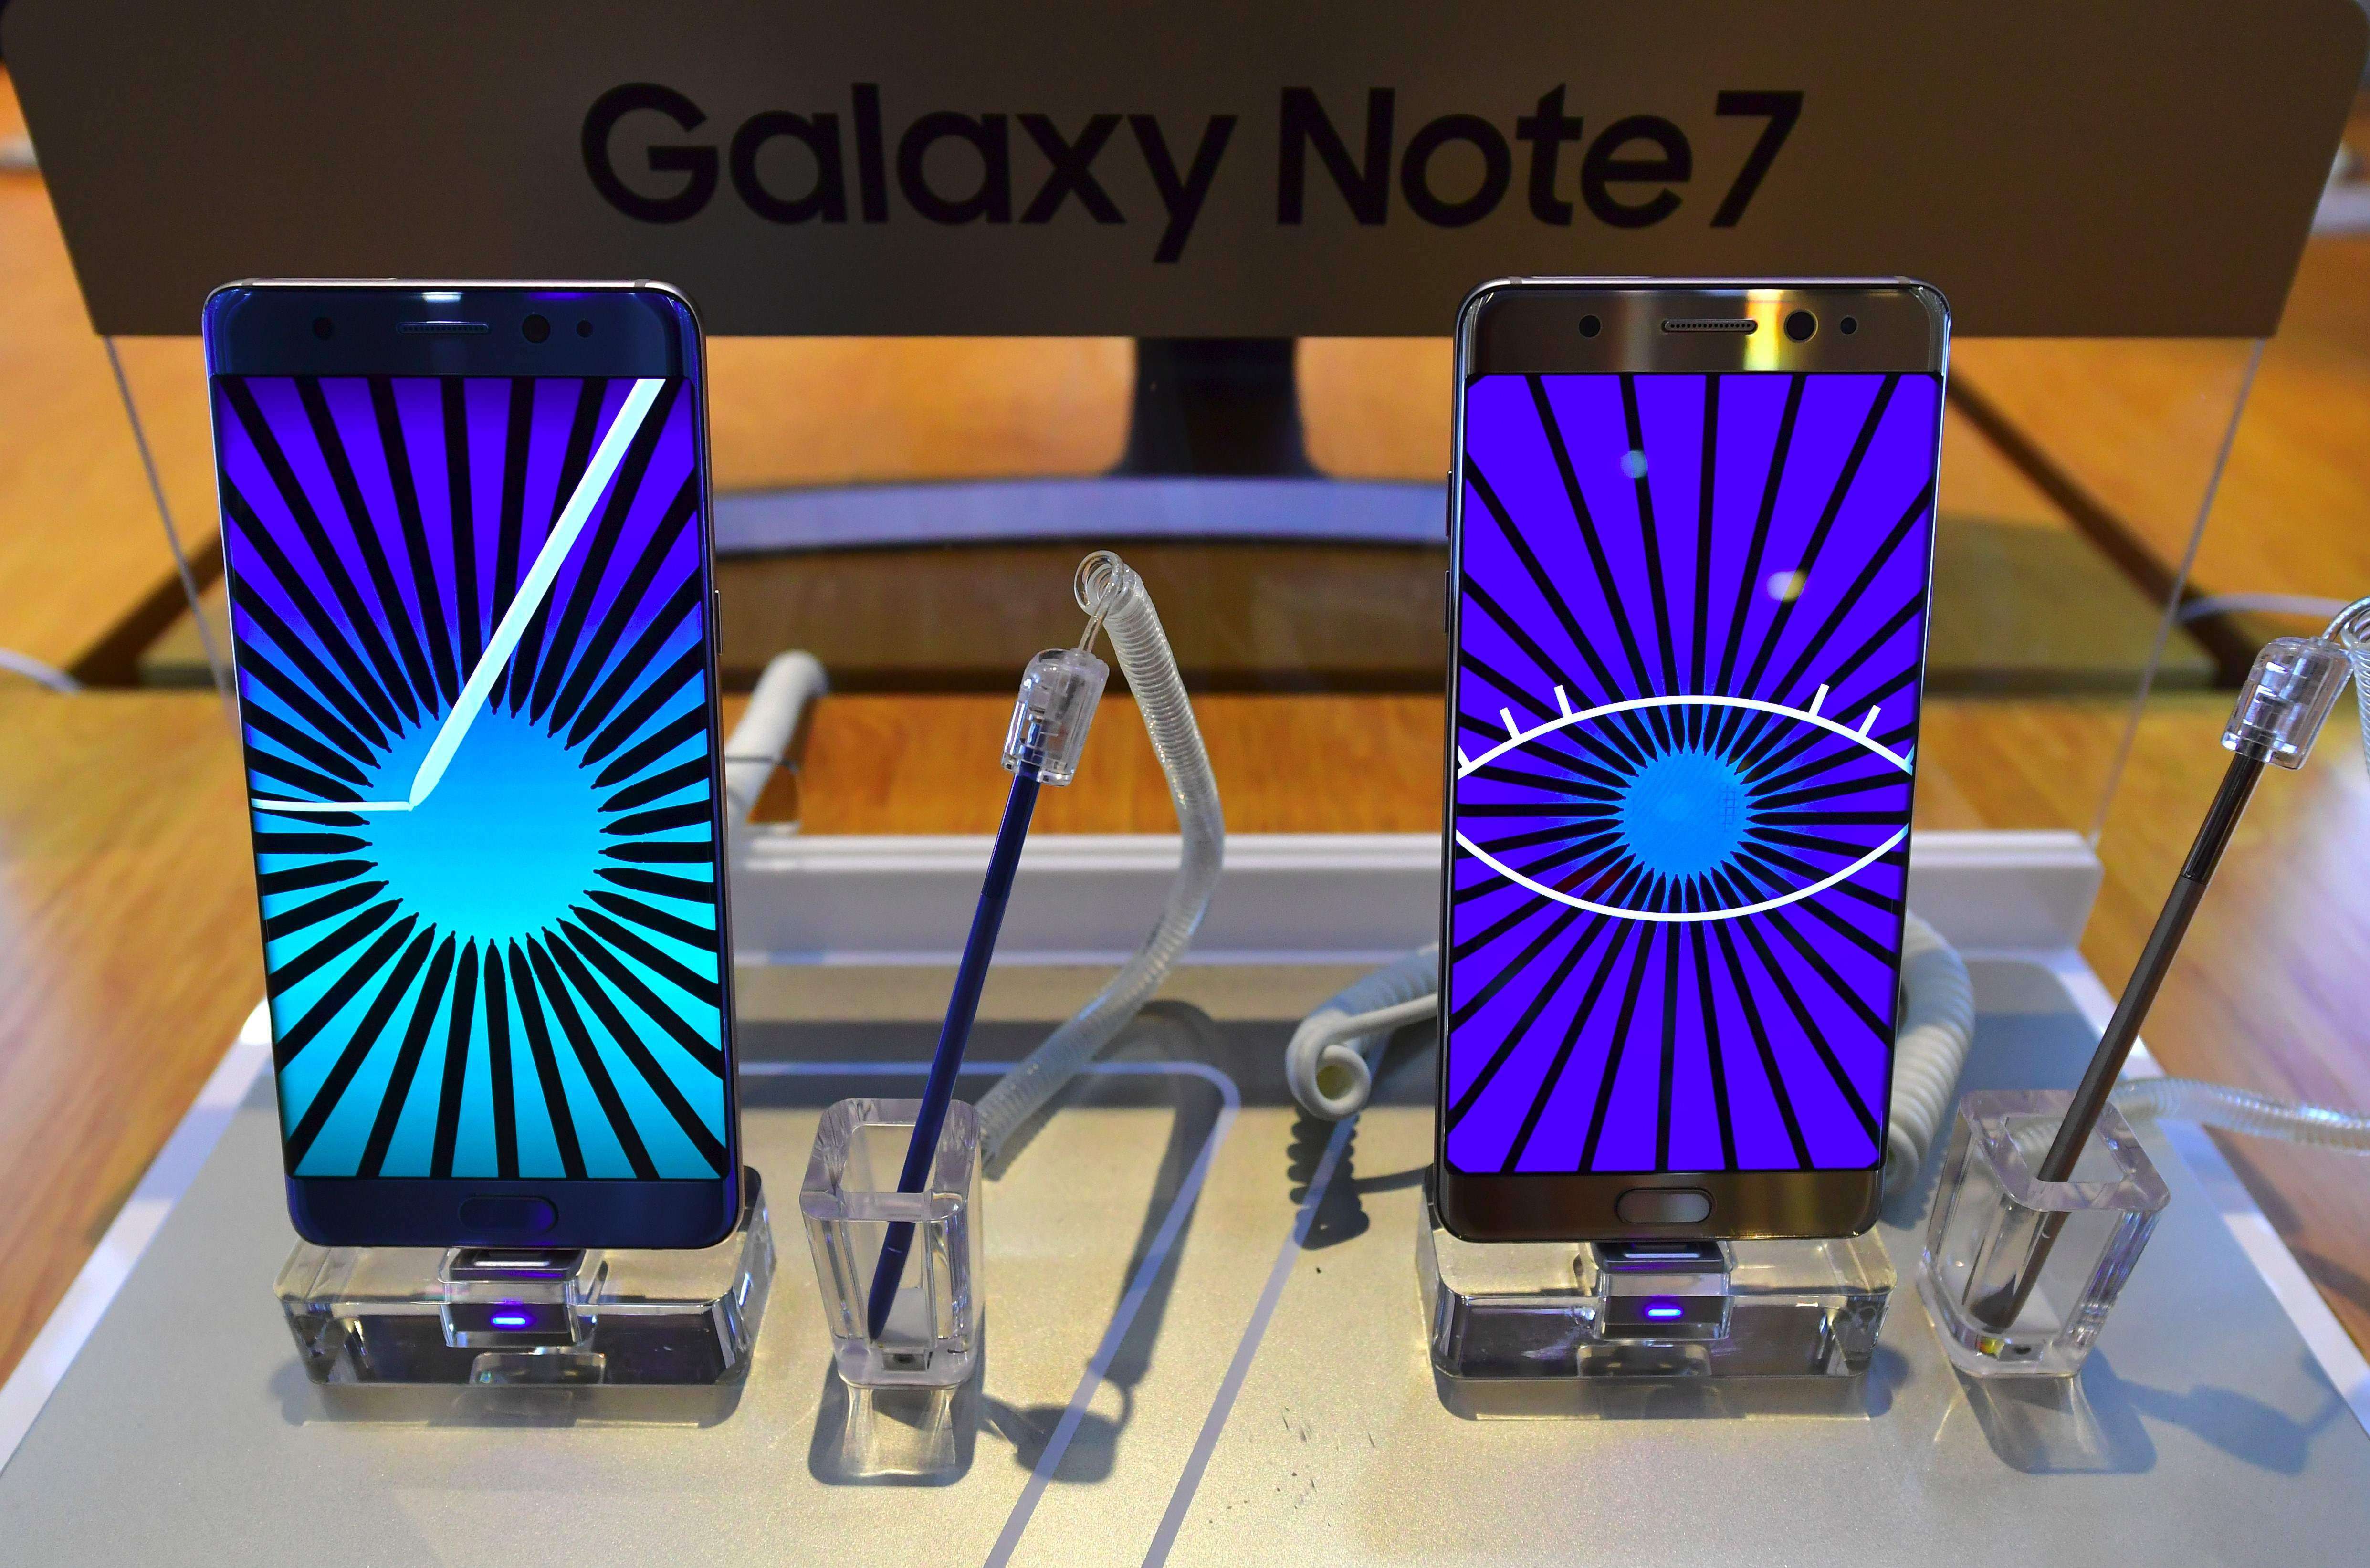 DGCA prohibits use of Samsung Note 7 on board aircraft